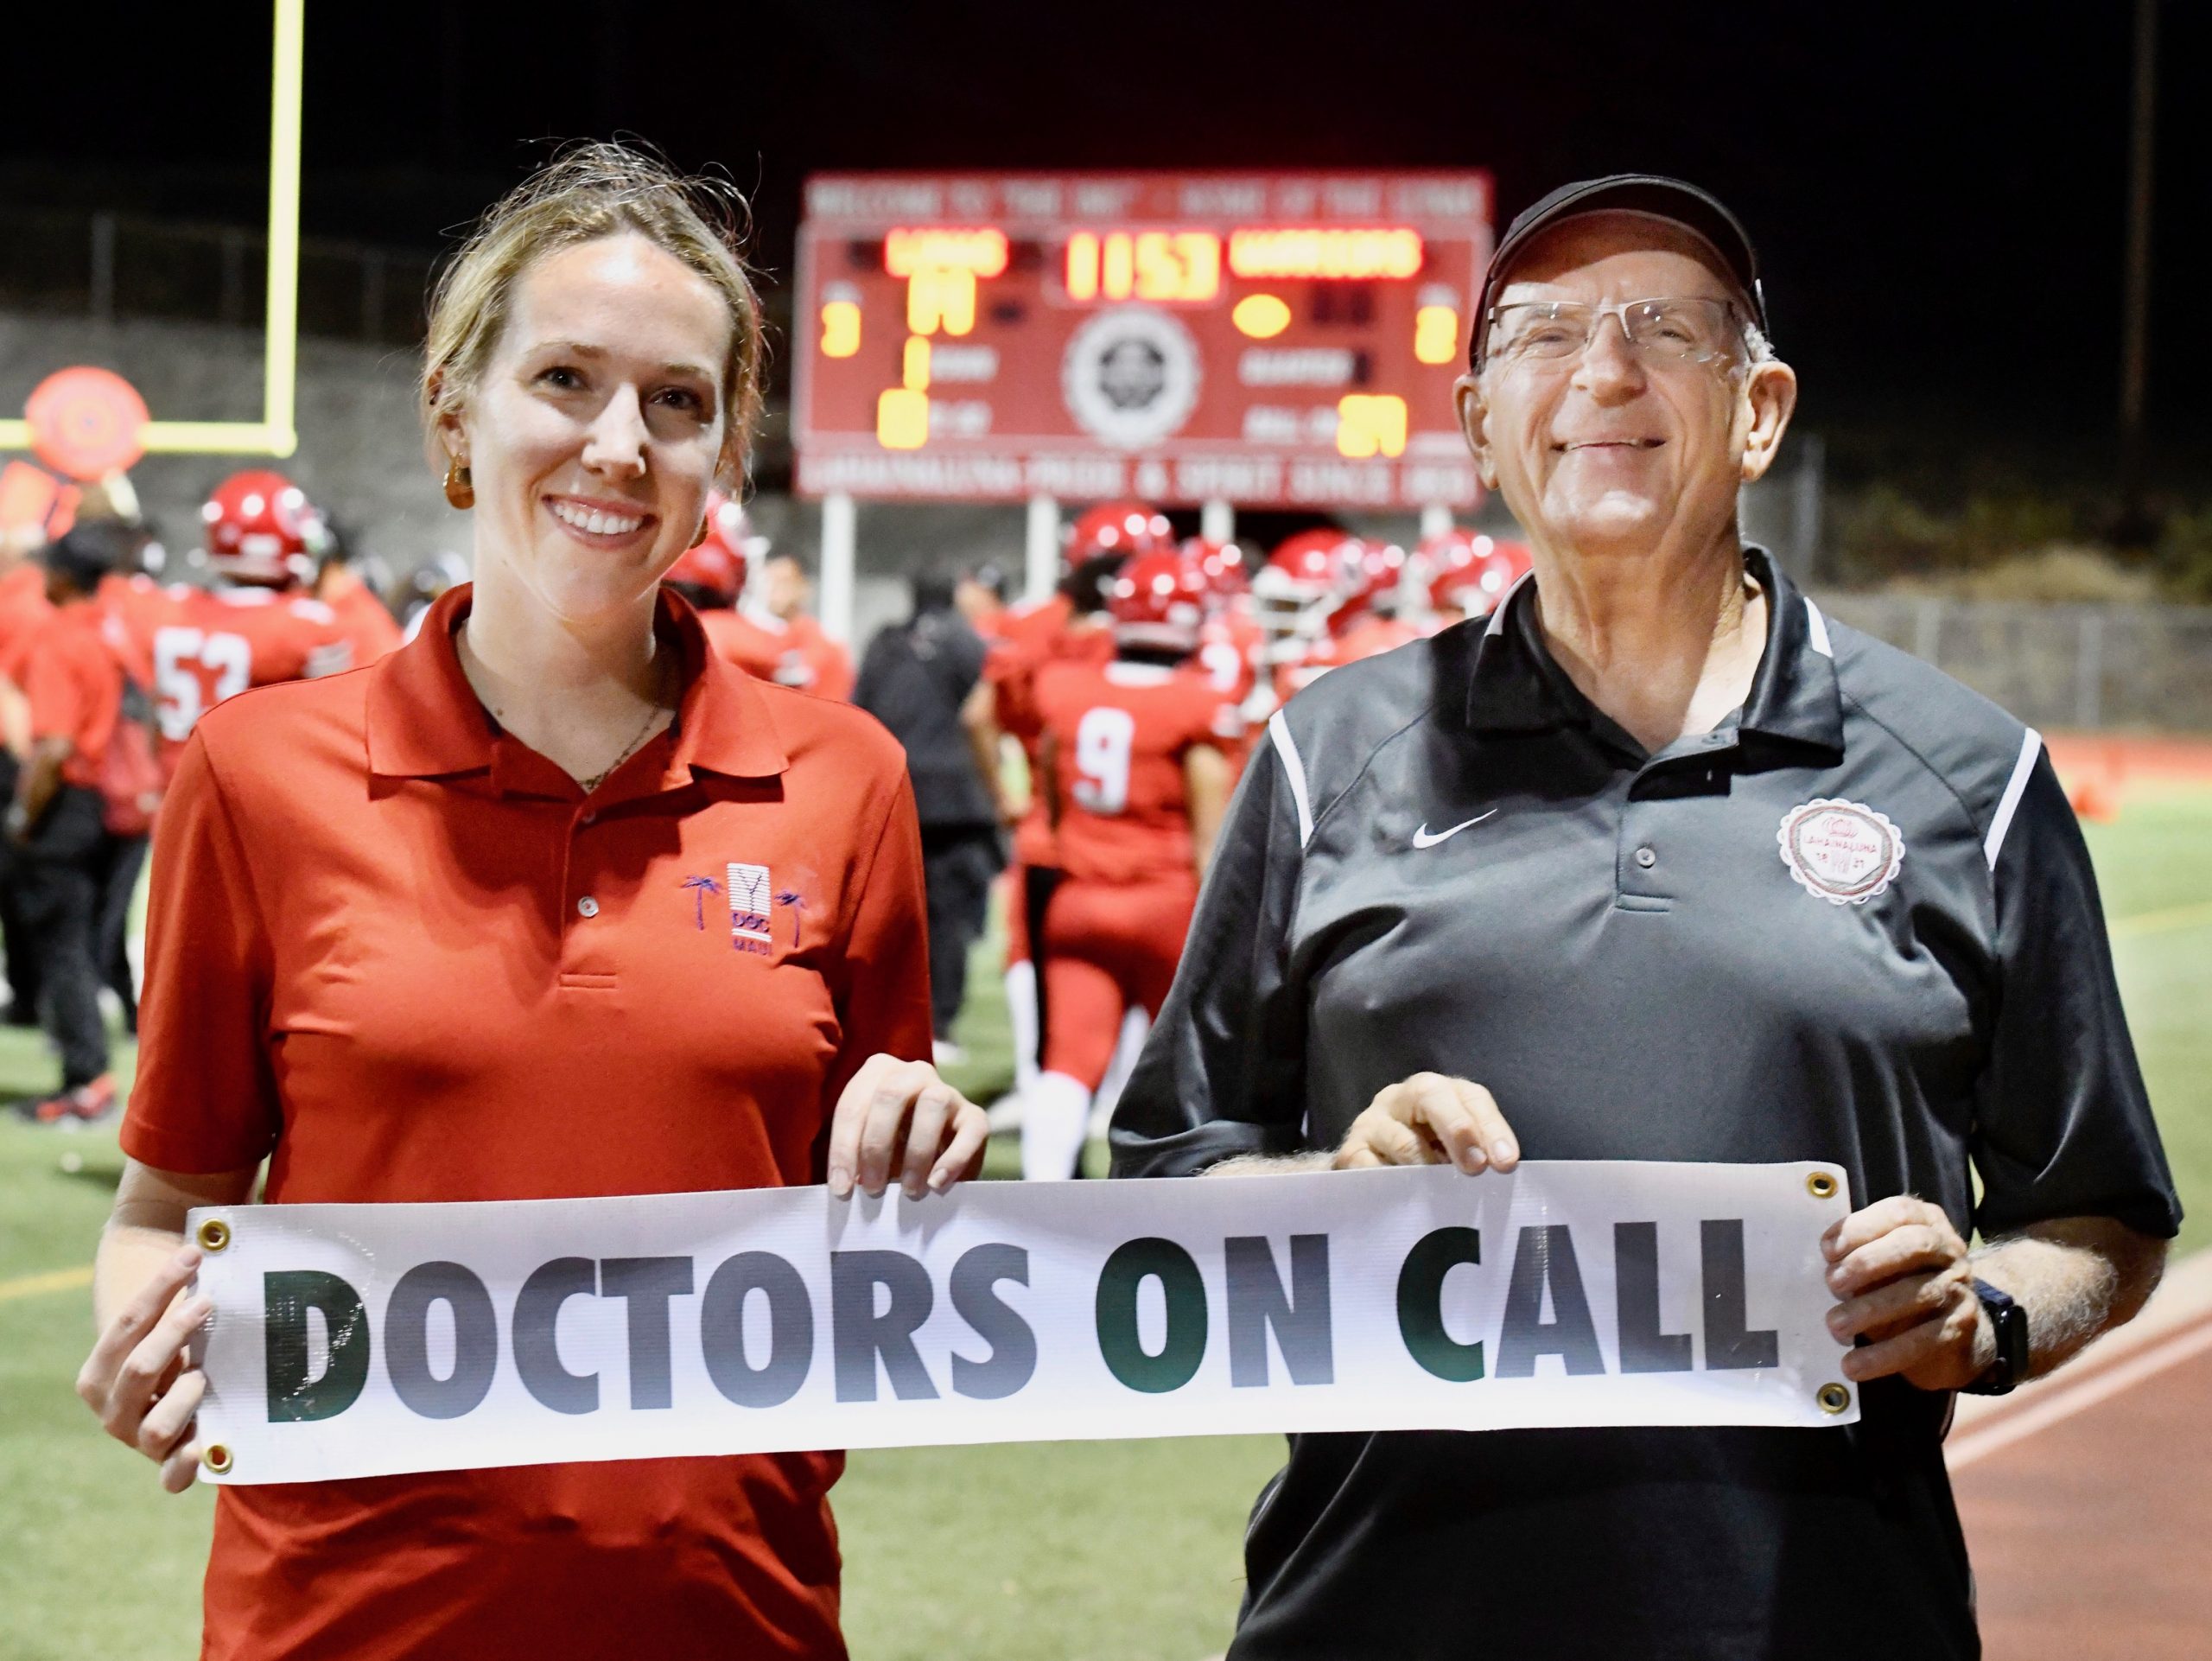 Doctors on Call, a Trusted Medical Provider for all Schools and Sports in West Maui